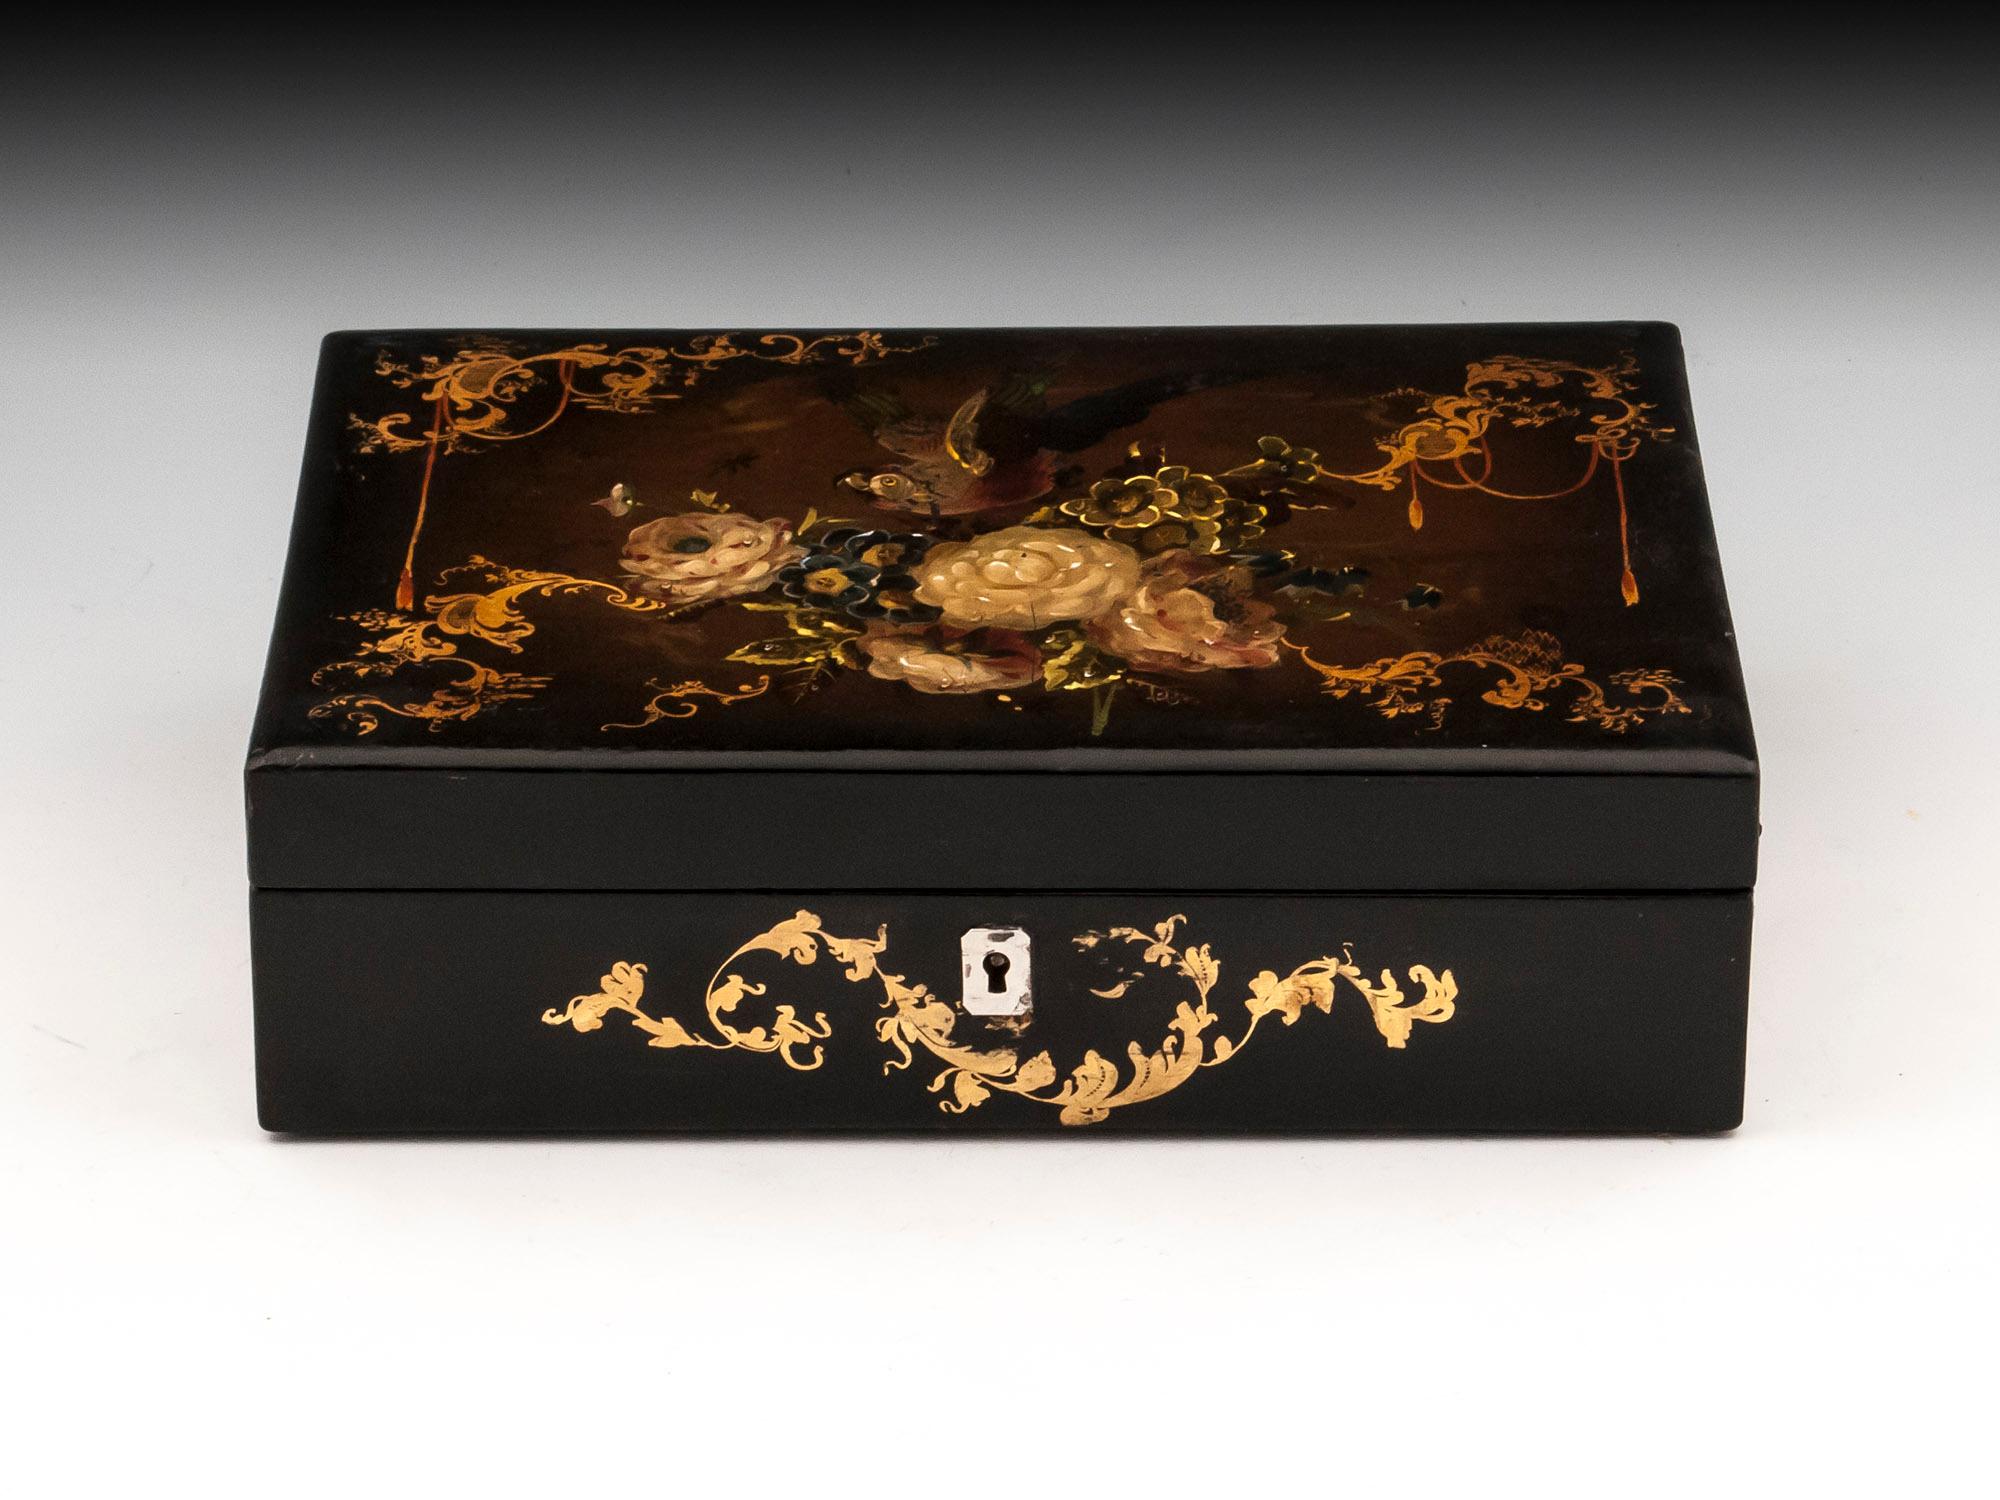 Papier mâché sewing box beautifully adorned with flowers and an exotic bird, framed by gold floral sprays which continue around the lock escutcheon. 

The interior of this papier mâché sewing box is lined in green velvet and patterned paper and is